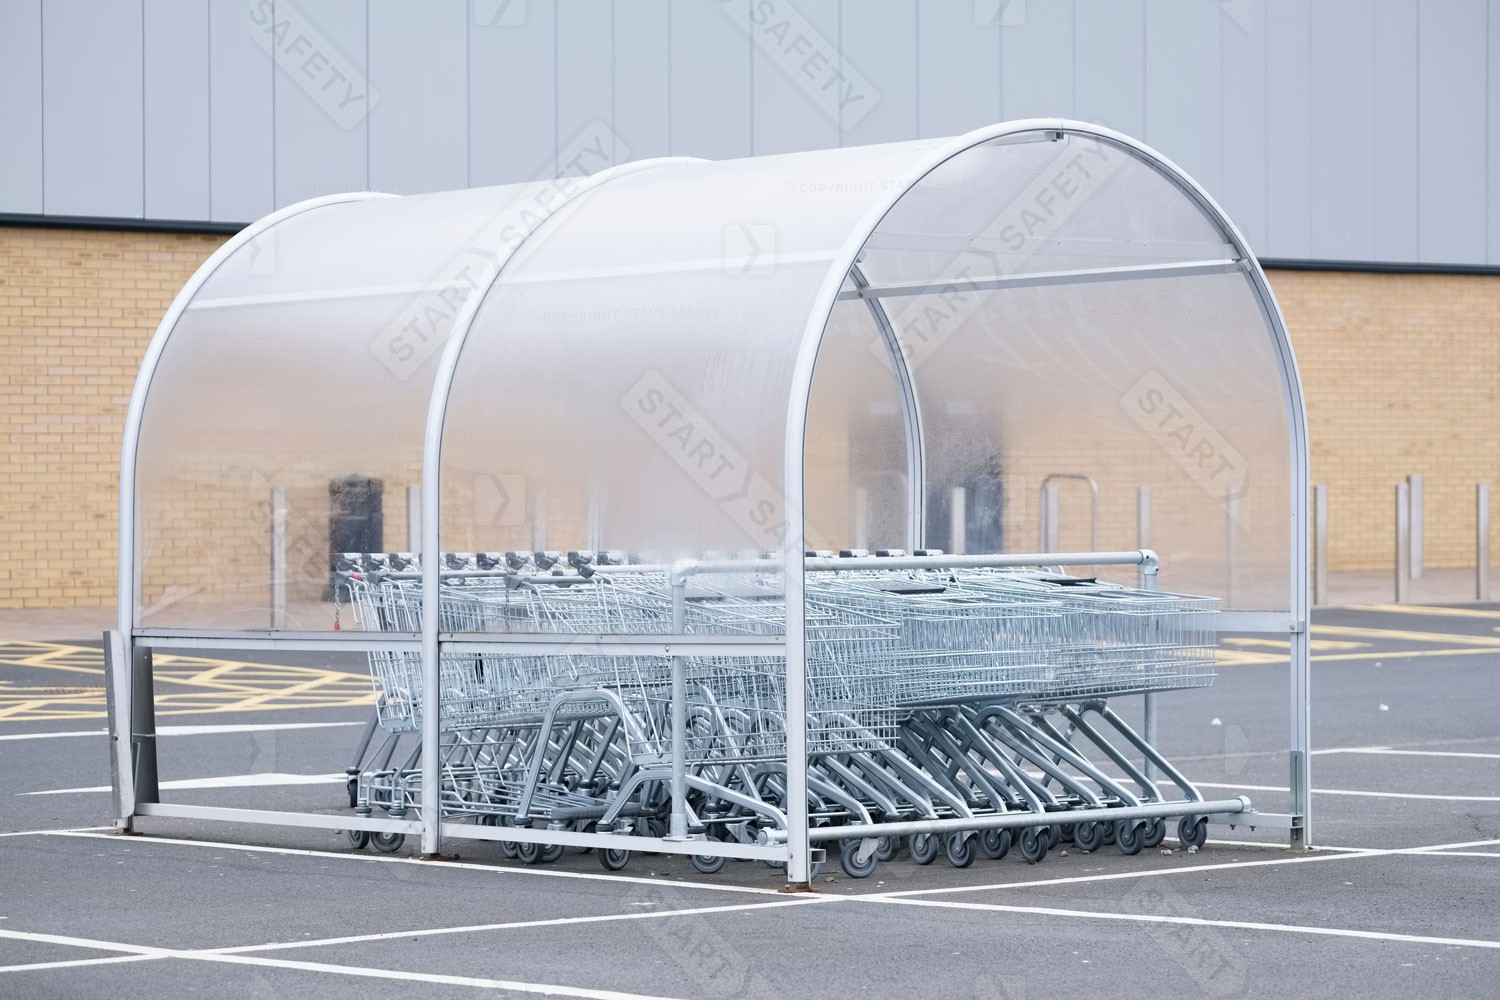 Shelter Full of Trolleys Waiting to Be Used